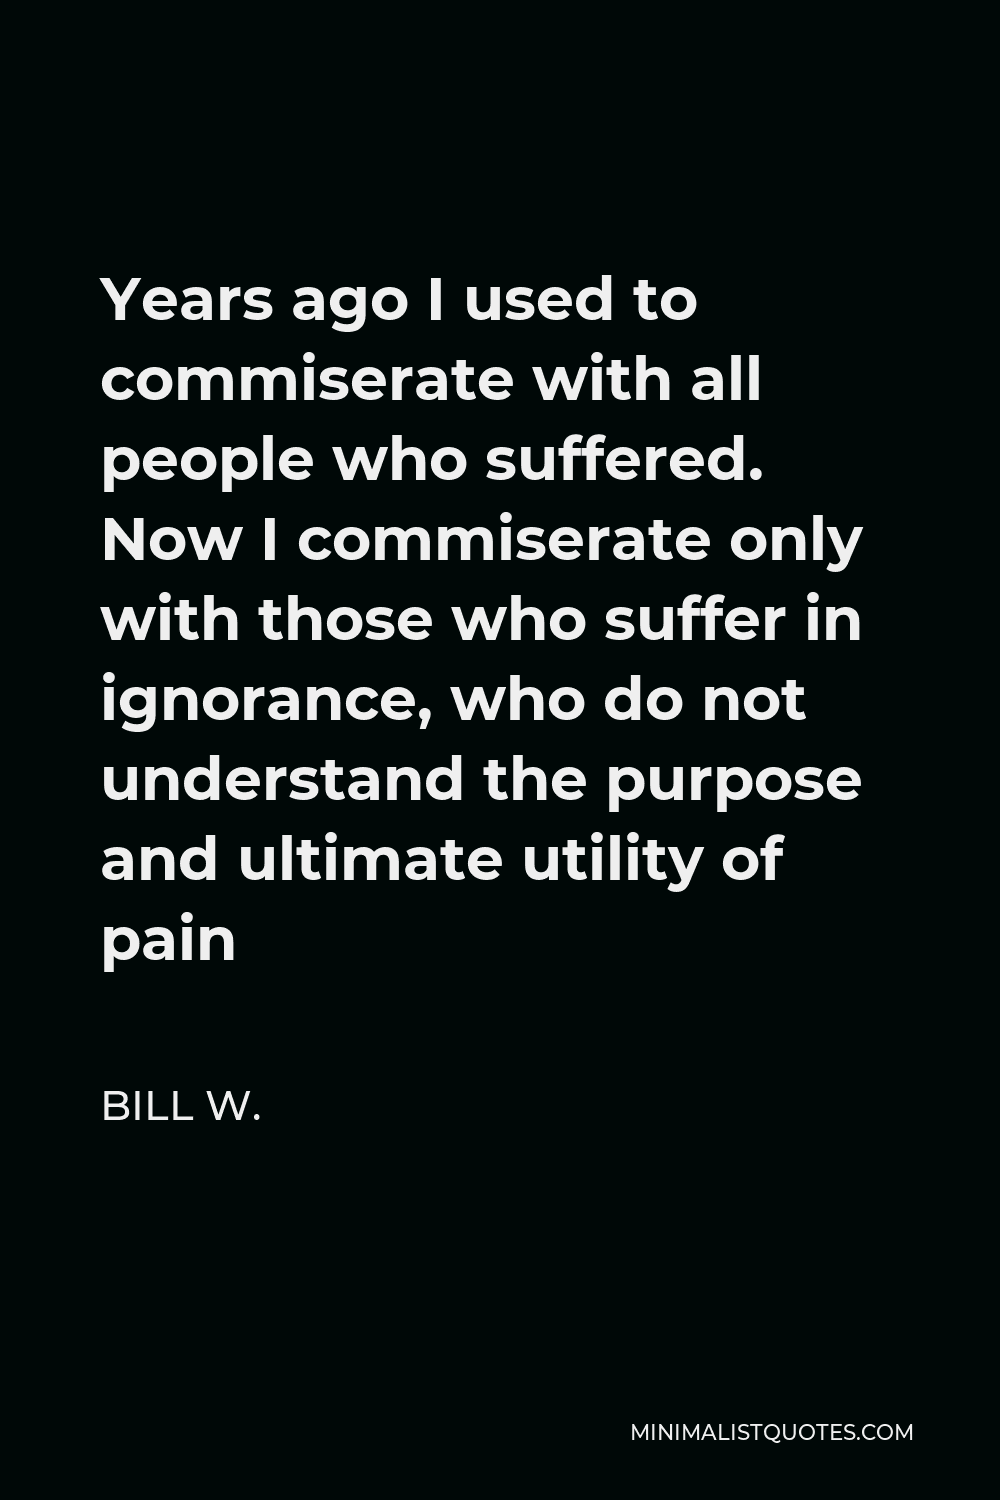 Bill W. Quote - Years ago I used to commiserate with all people who suffered. Now I commiserate only with those who suffer in ignorance, who do not understand the purpose and ultimate utility of pain